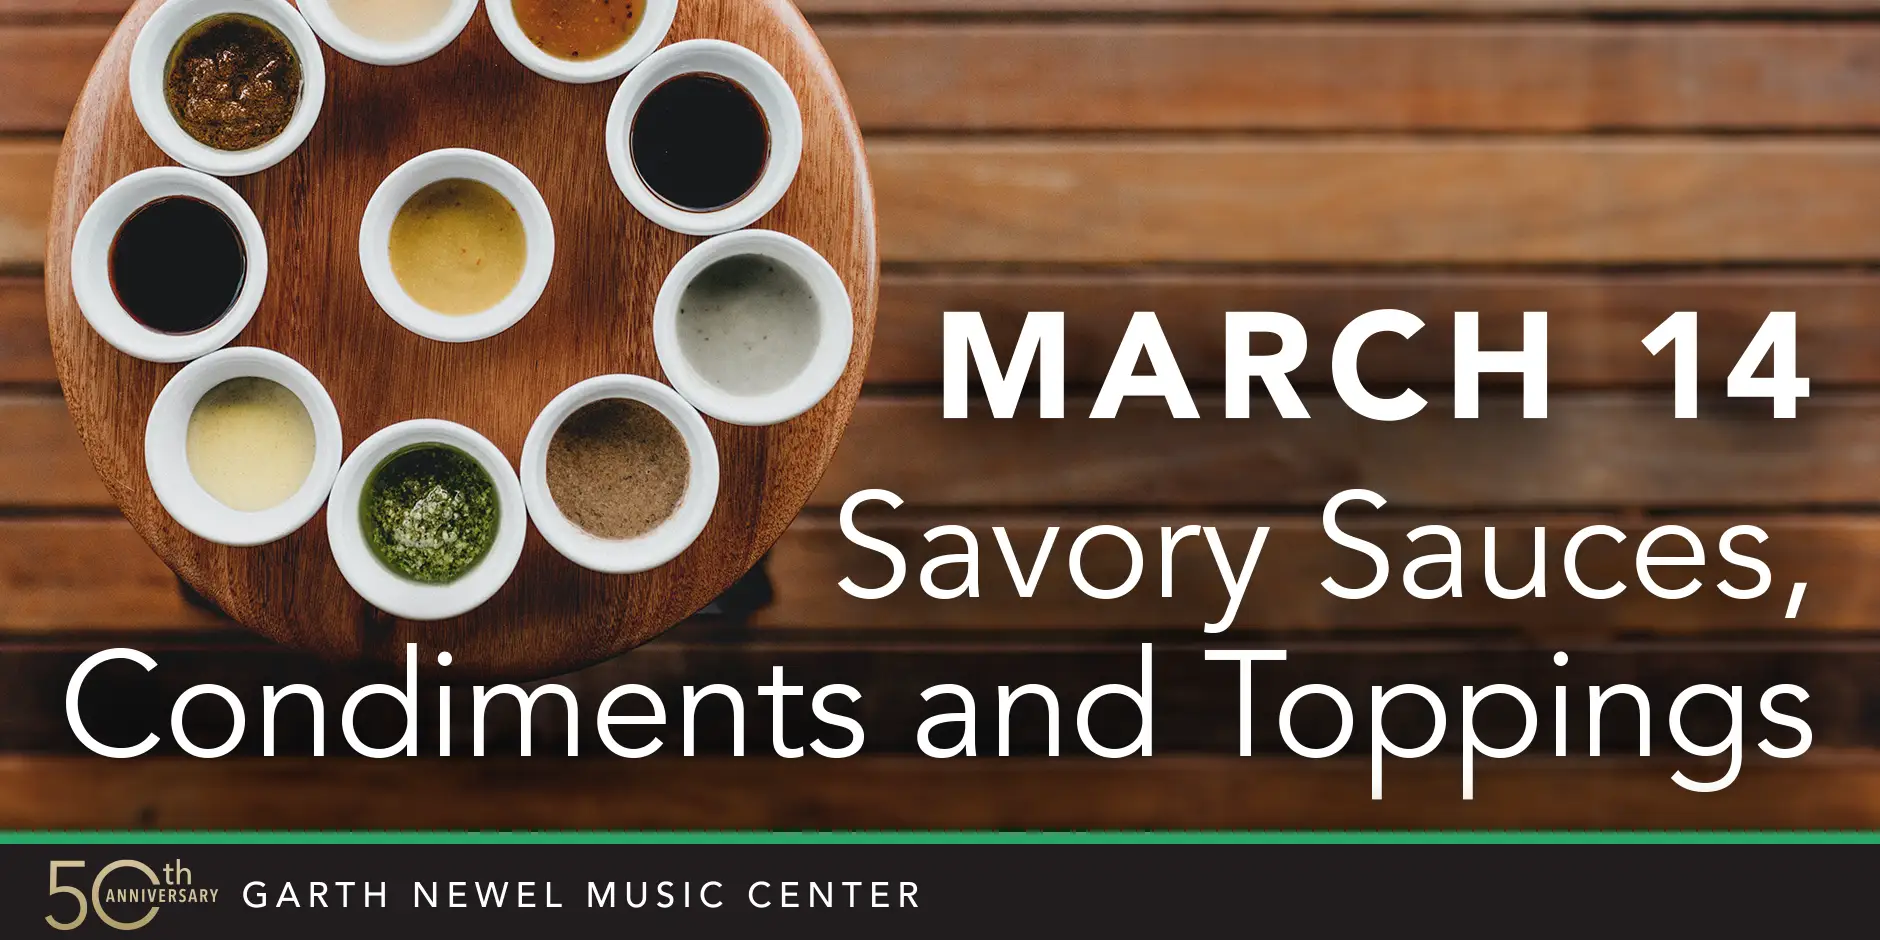 March 14 - Savory Sauces, Condiments and Toppings